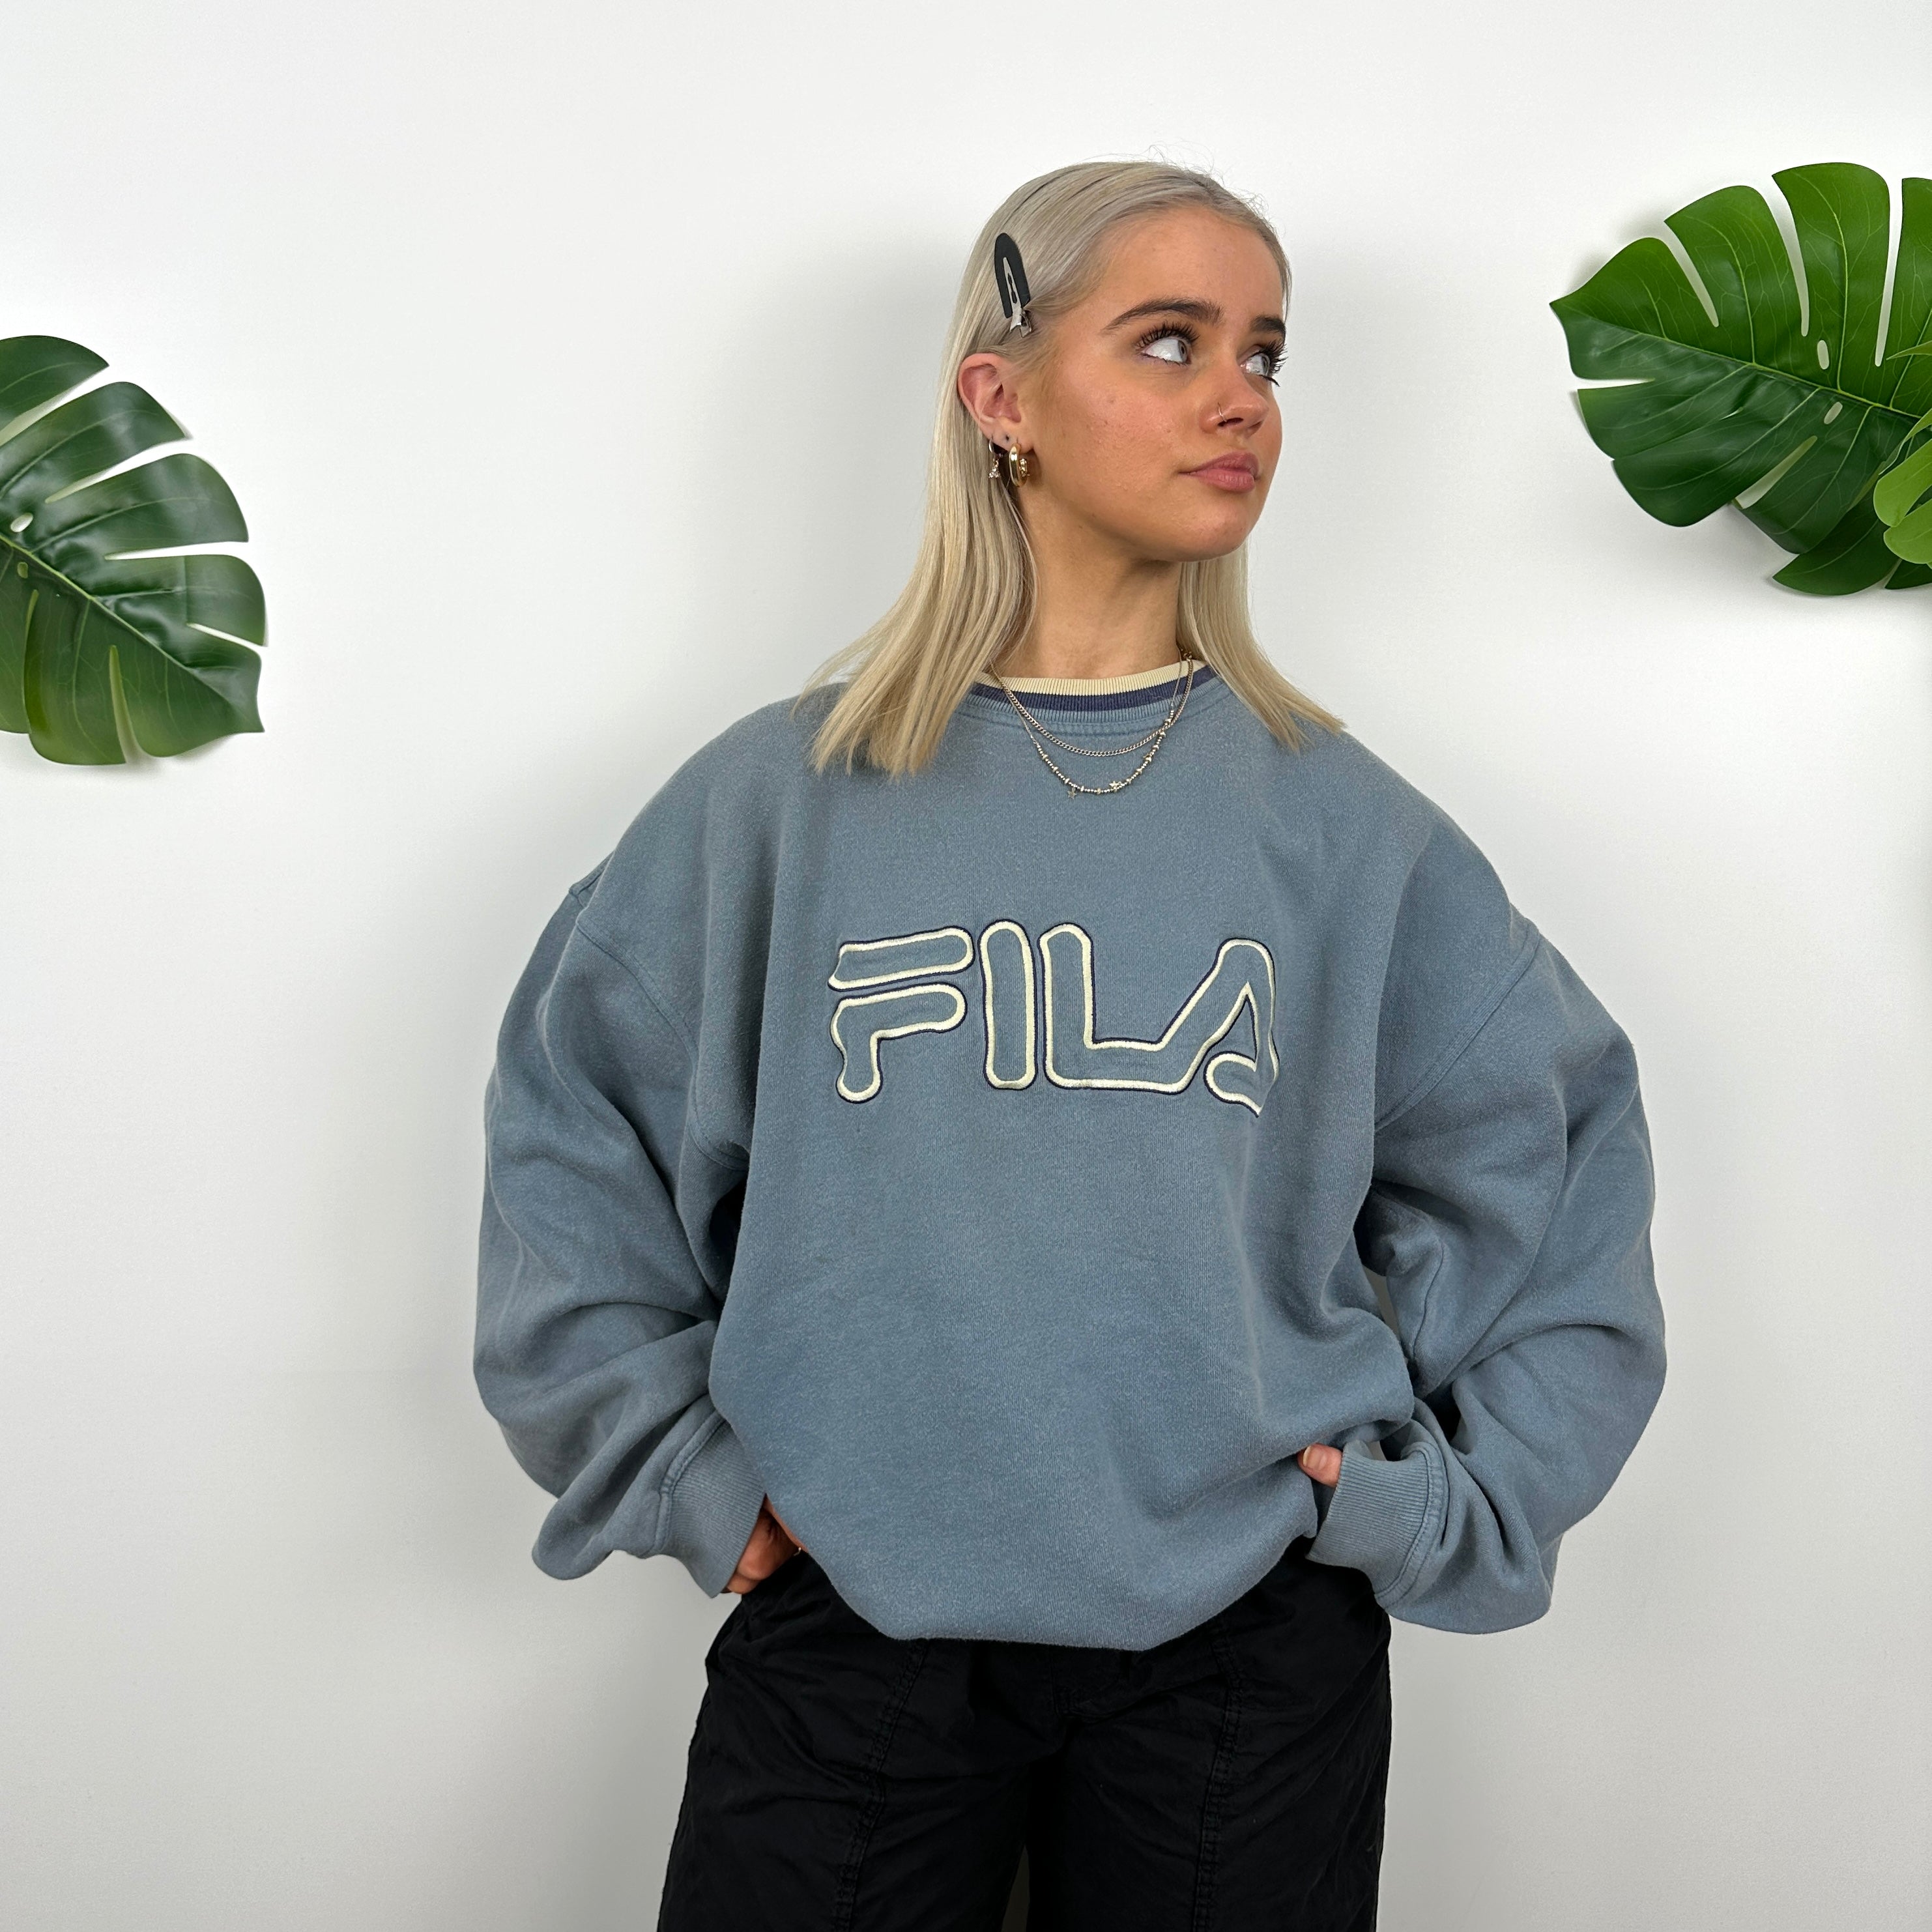 FILA Baby Blue Embroidered Spell Out Sweatshirt (XXL)